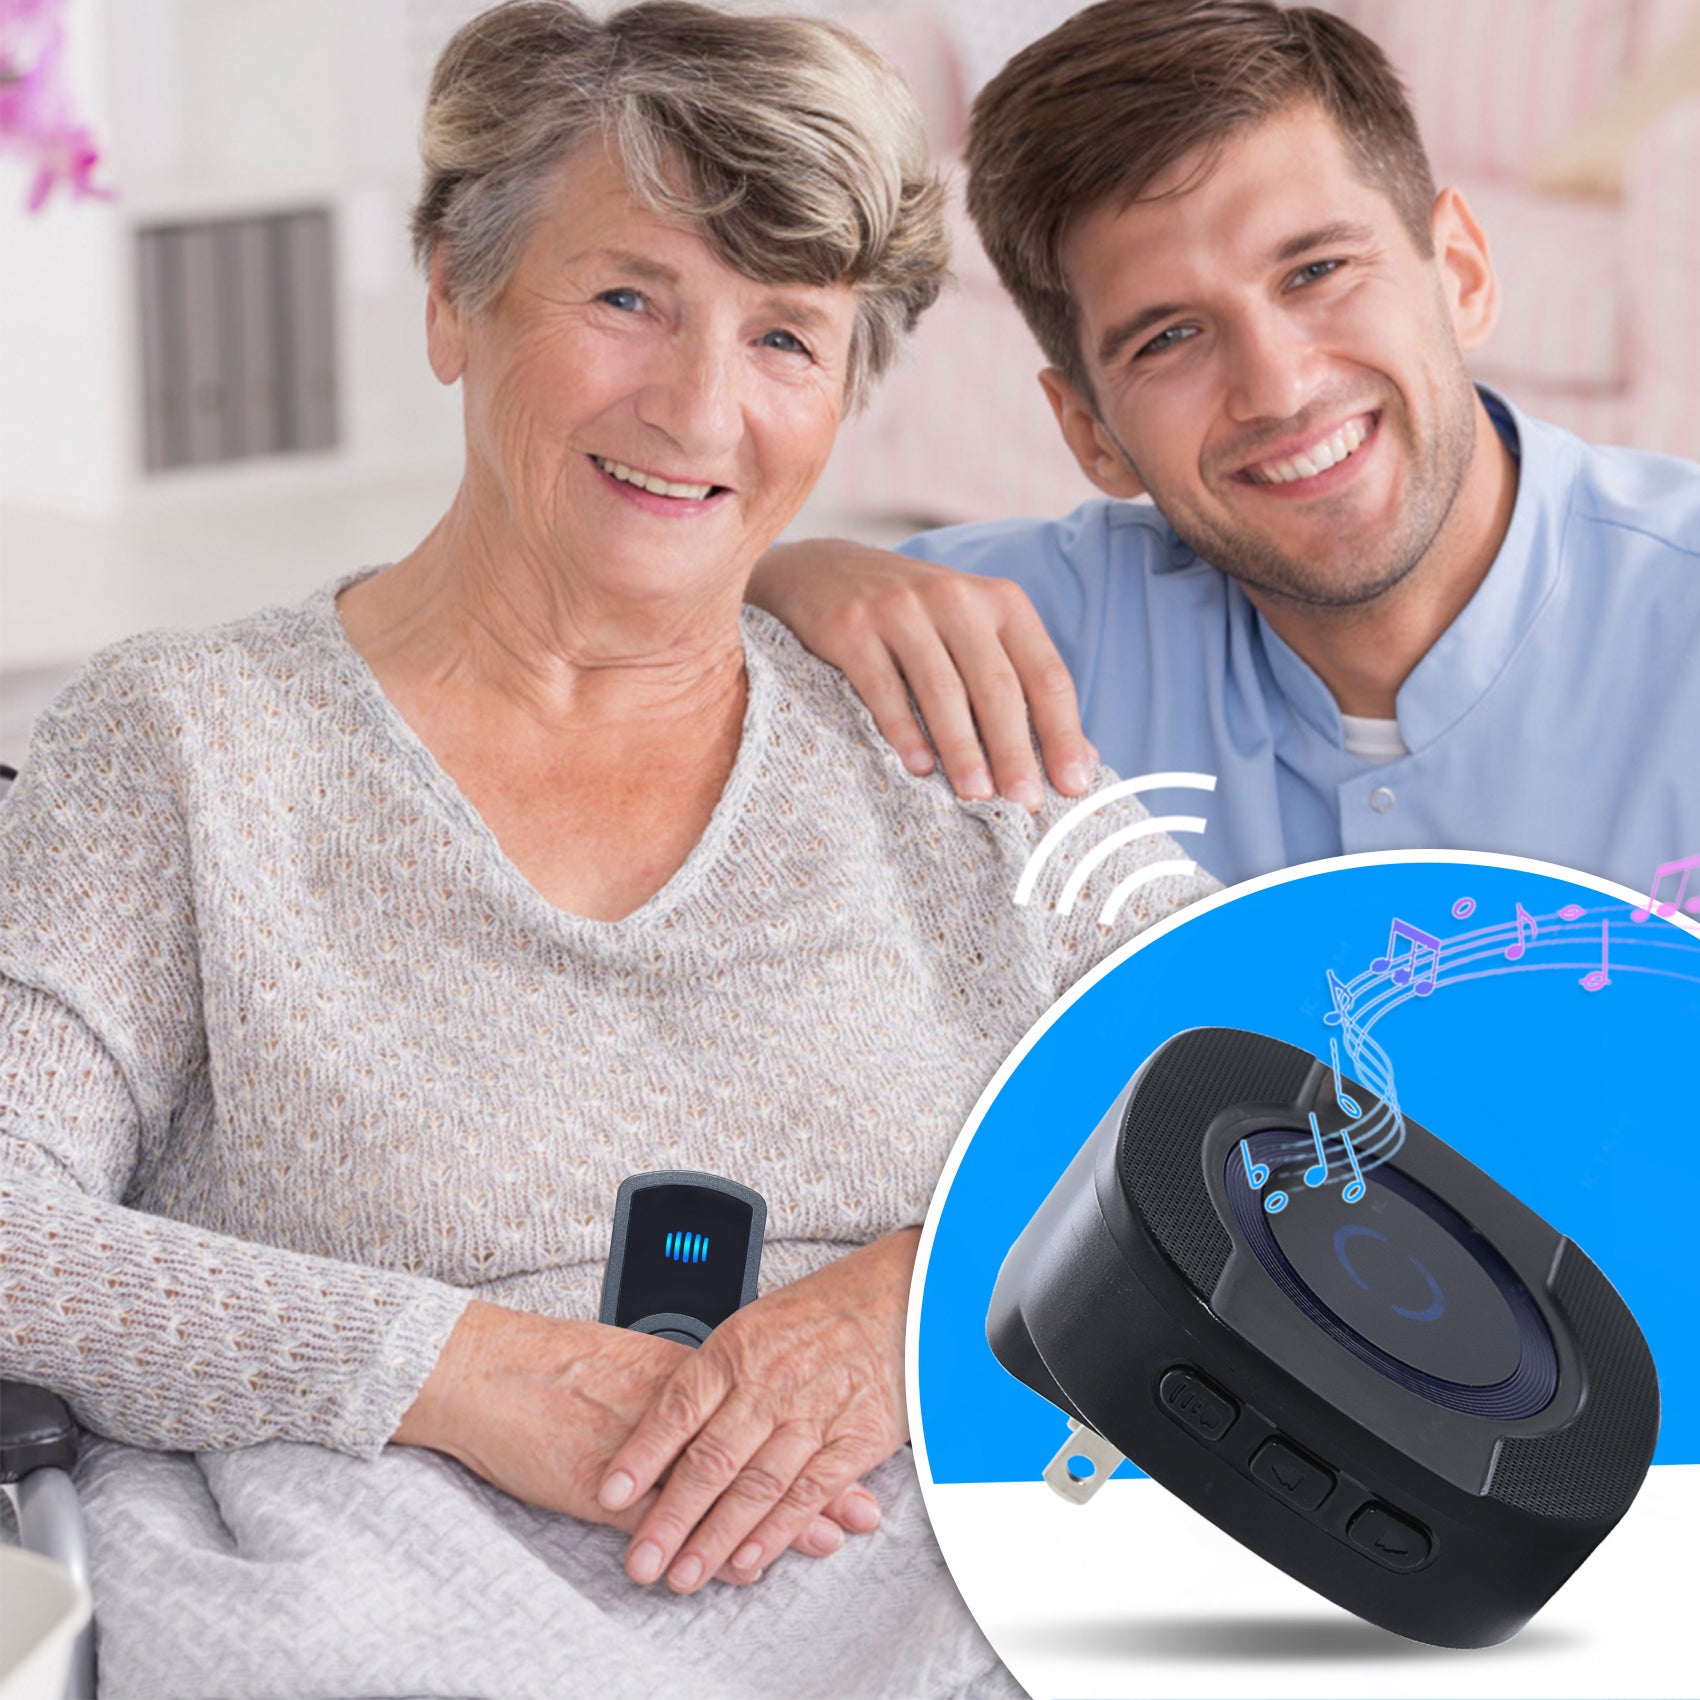 CallToU：The benefits and advantages of home pagers to customers